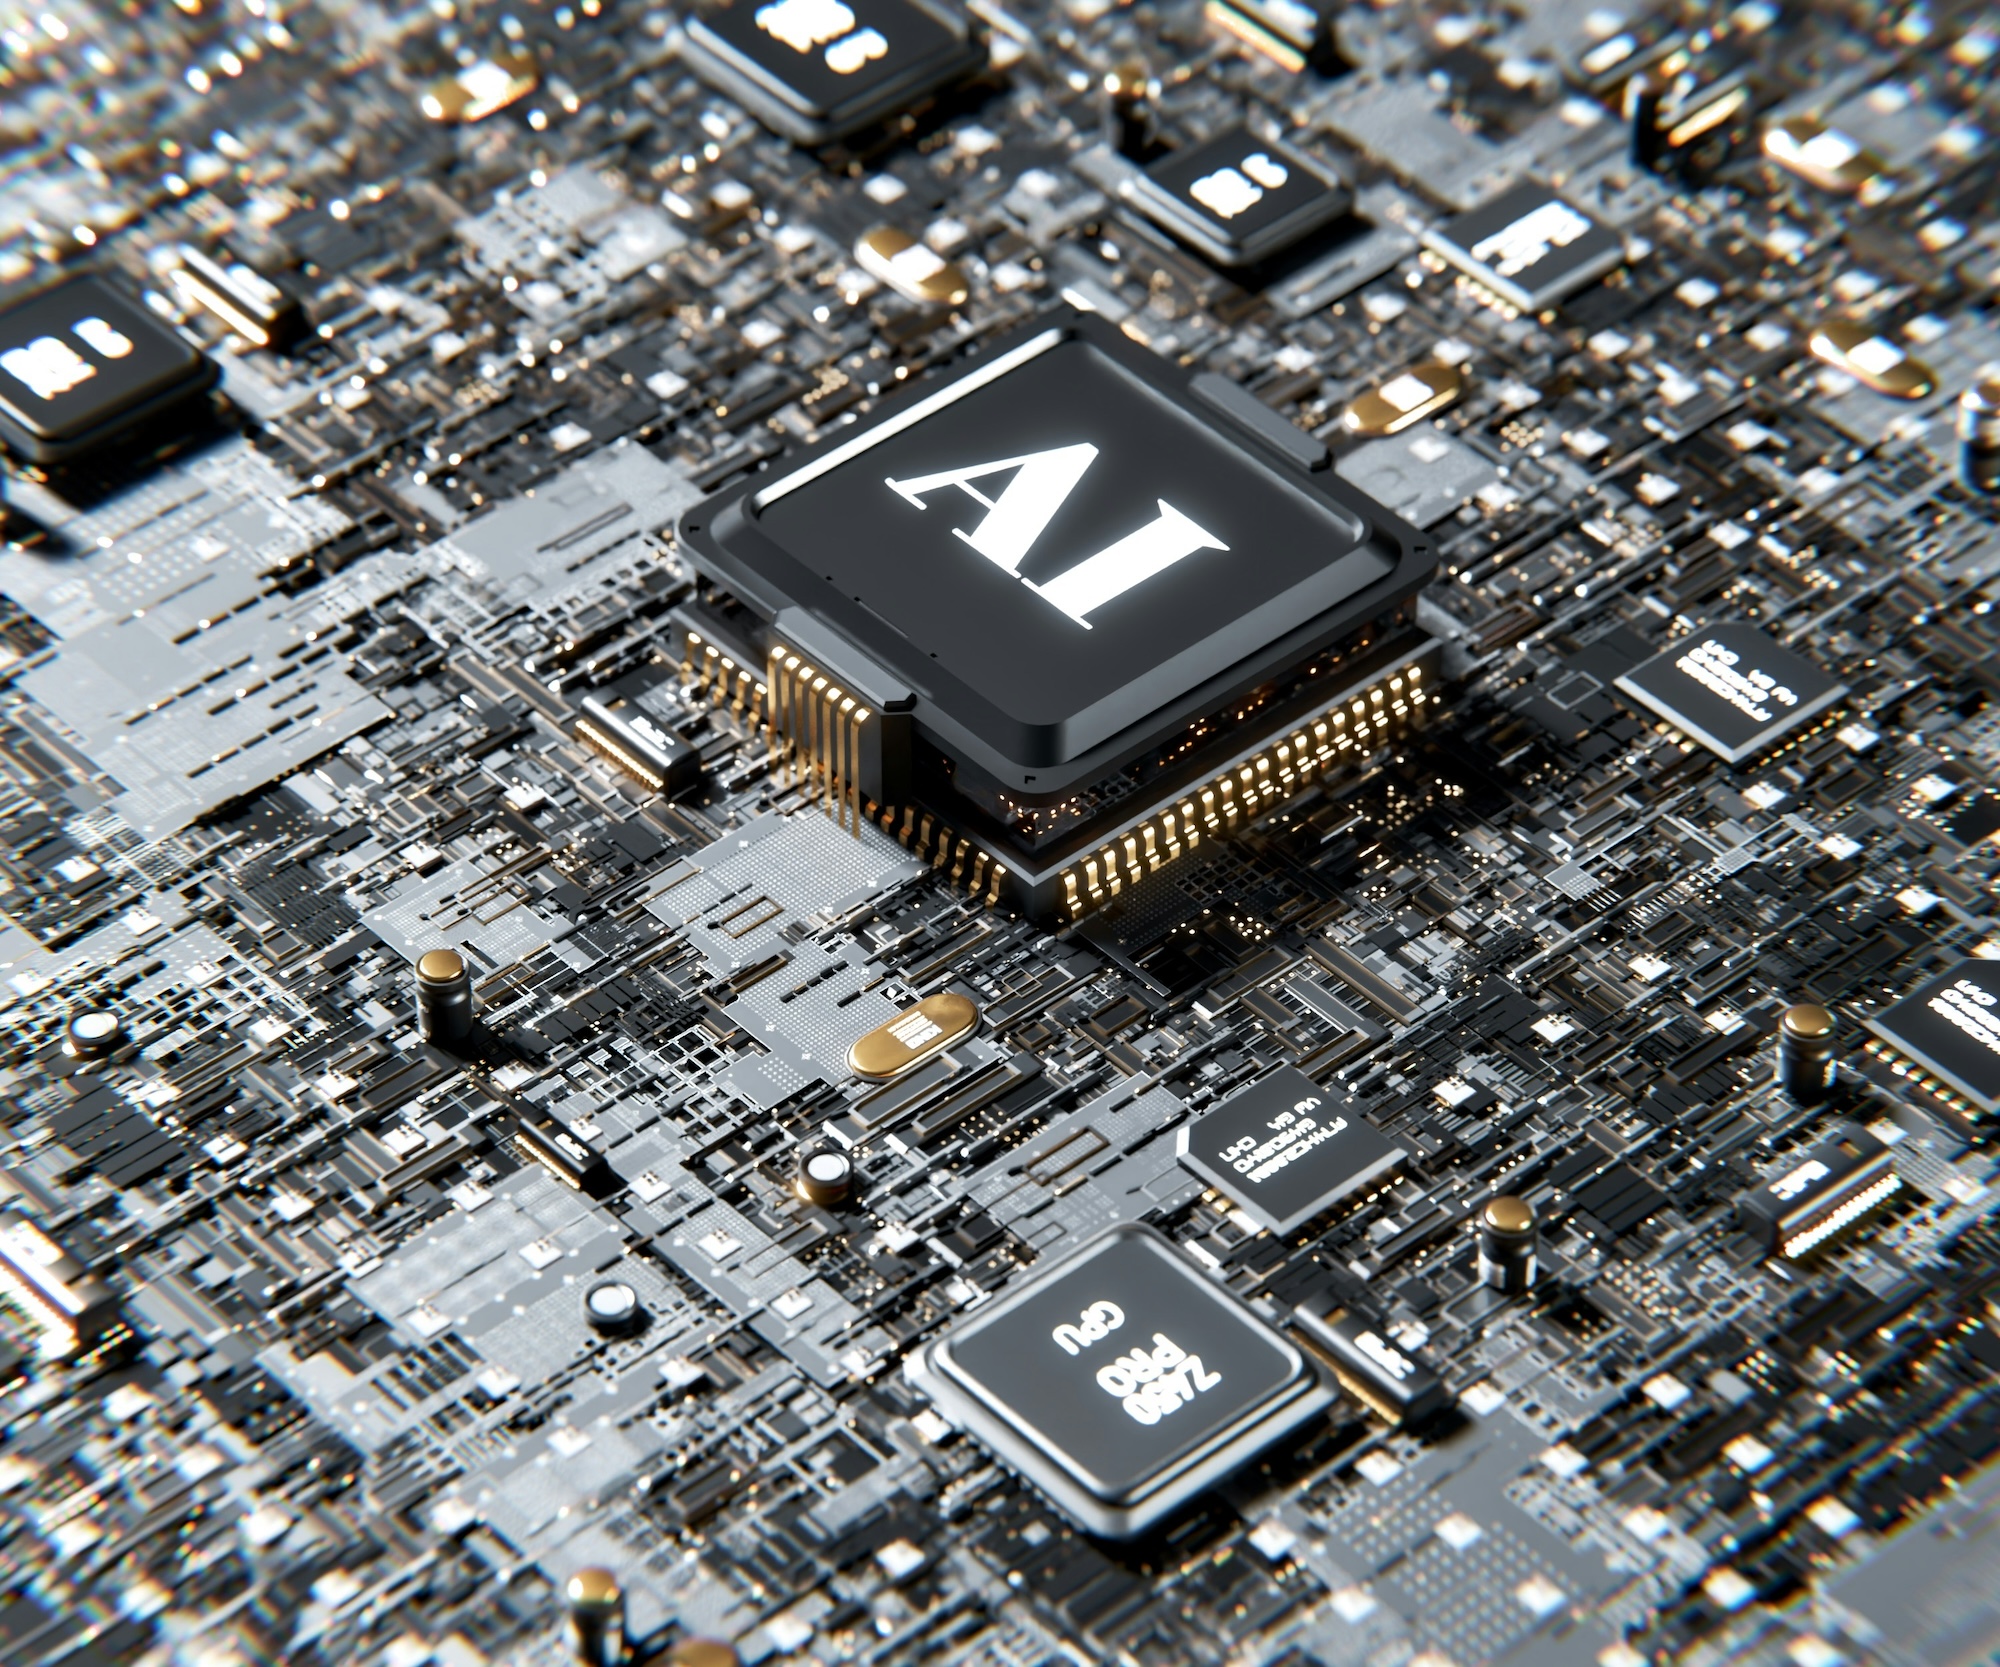 Photo of an AI chip on a circuit board by Igor Omilaev on Unsplash